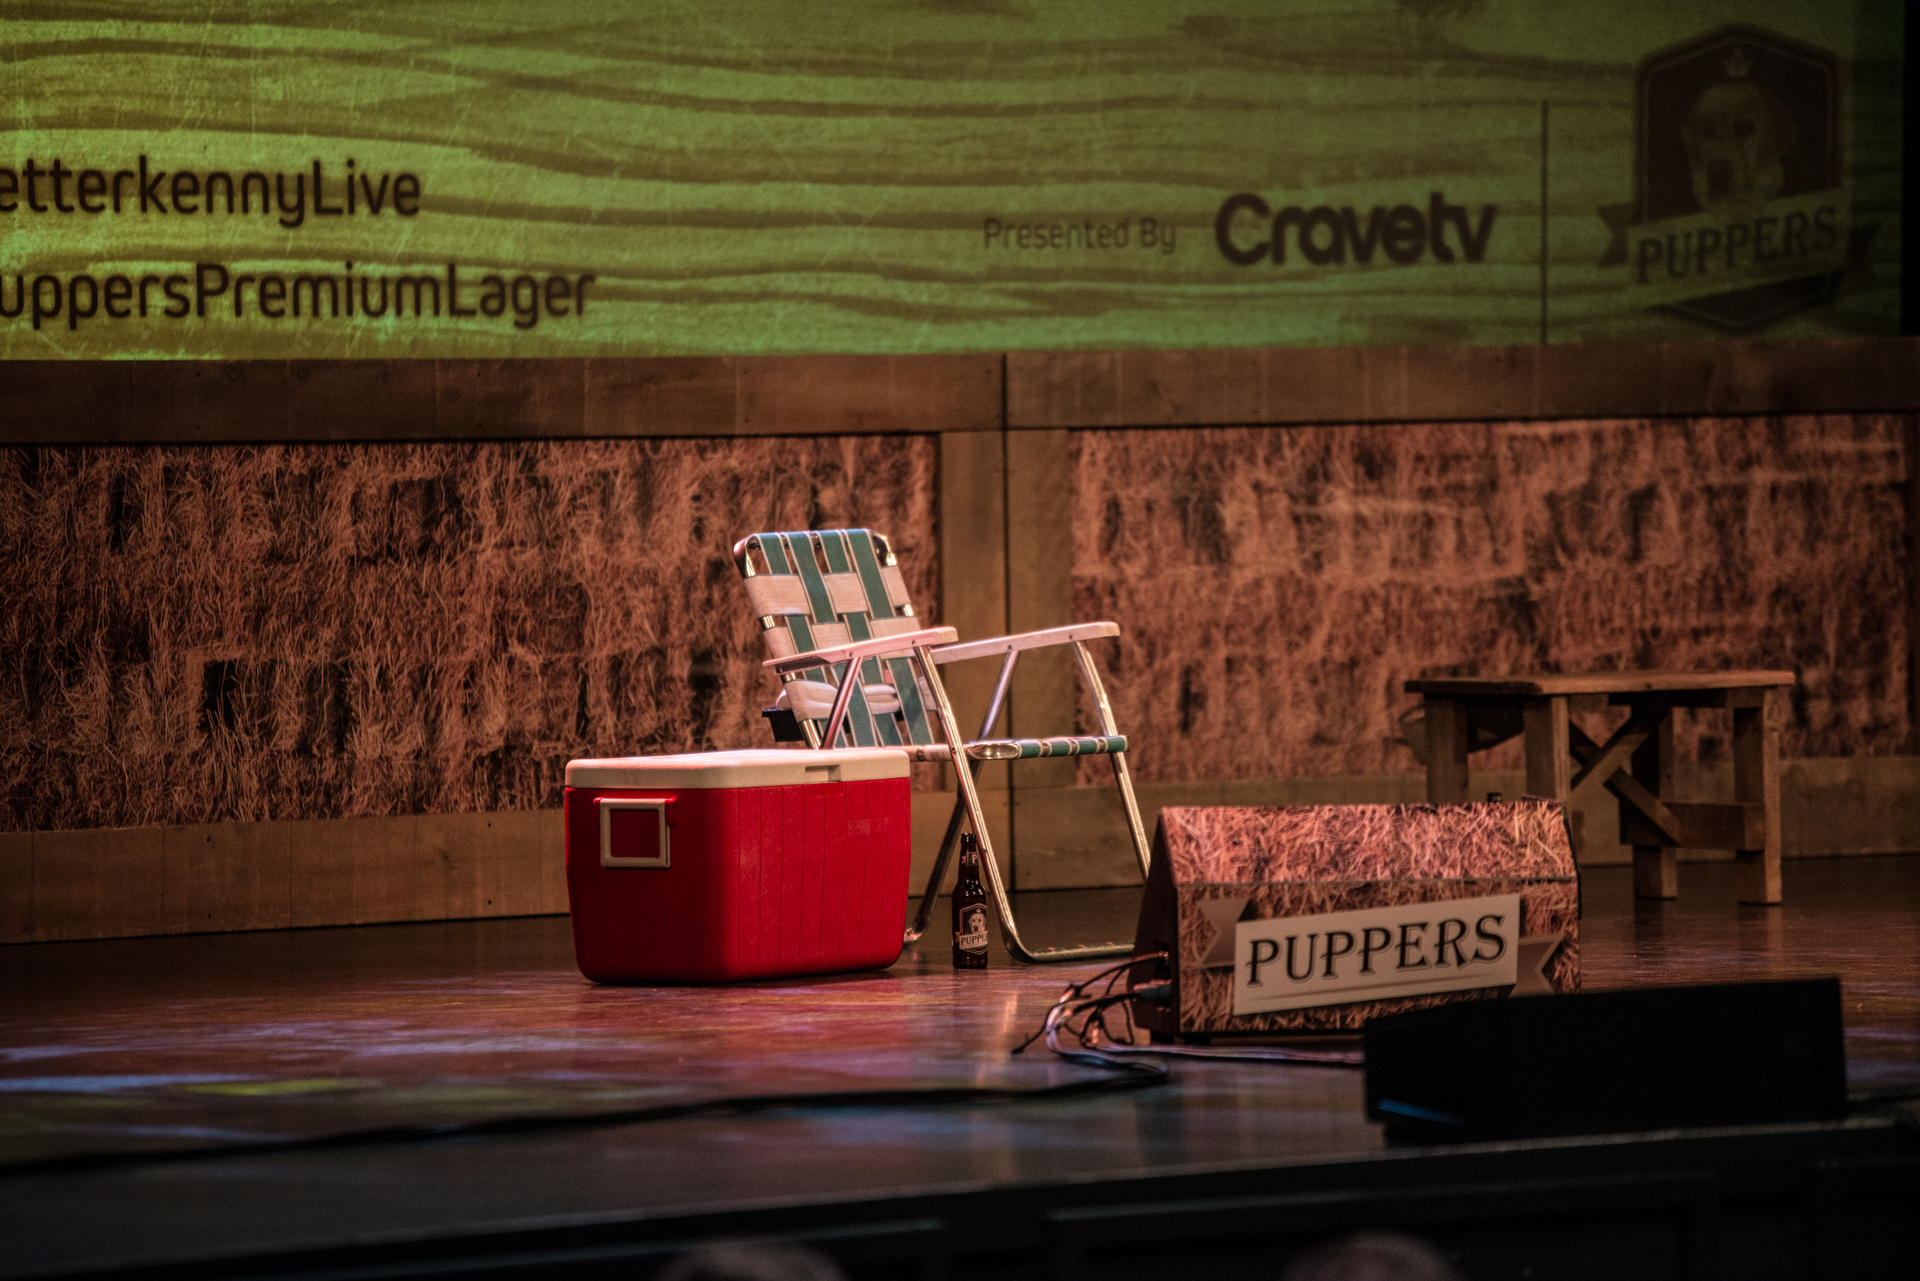 The stage is set with a solitary green folding chair, a red cooler on the left of the chair, a Puppers beer underneath the chair, and a prominent Puppers sign in the foreground. In the background, hay contributes to the rustic atmosphere, alongside a promotional sign advertising Letterkenny on Crave TV. The scene is a perfect blend of laid-back charm and entertainment.